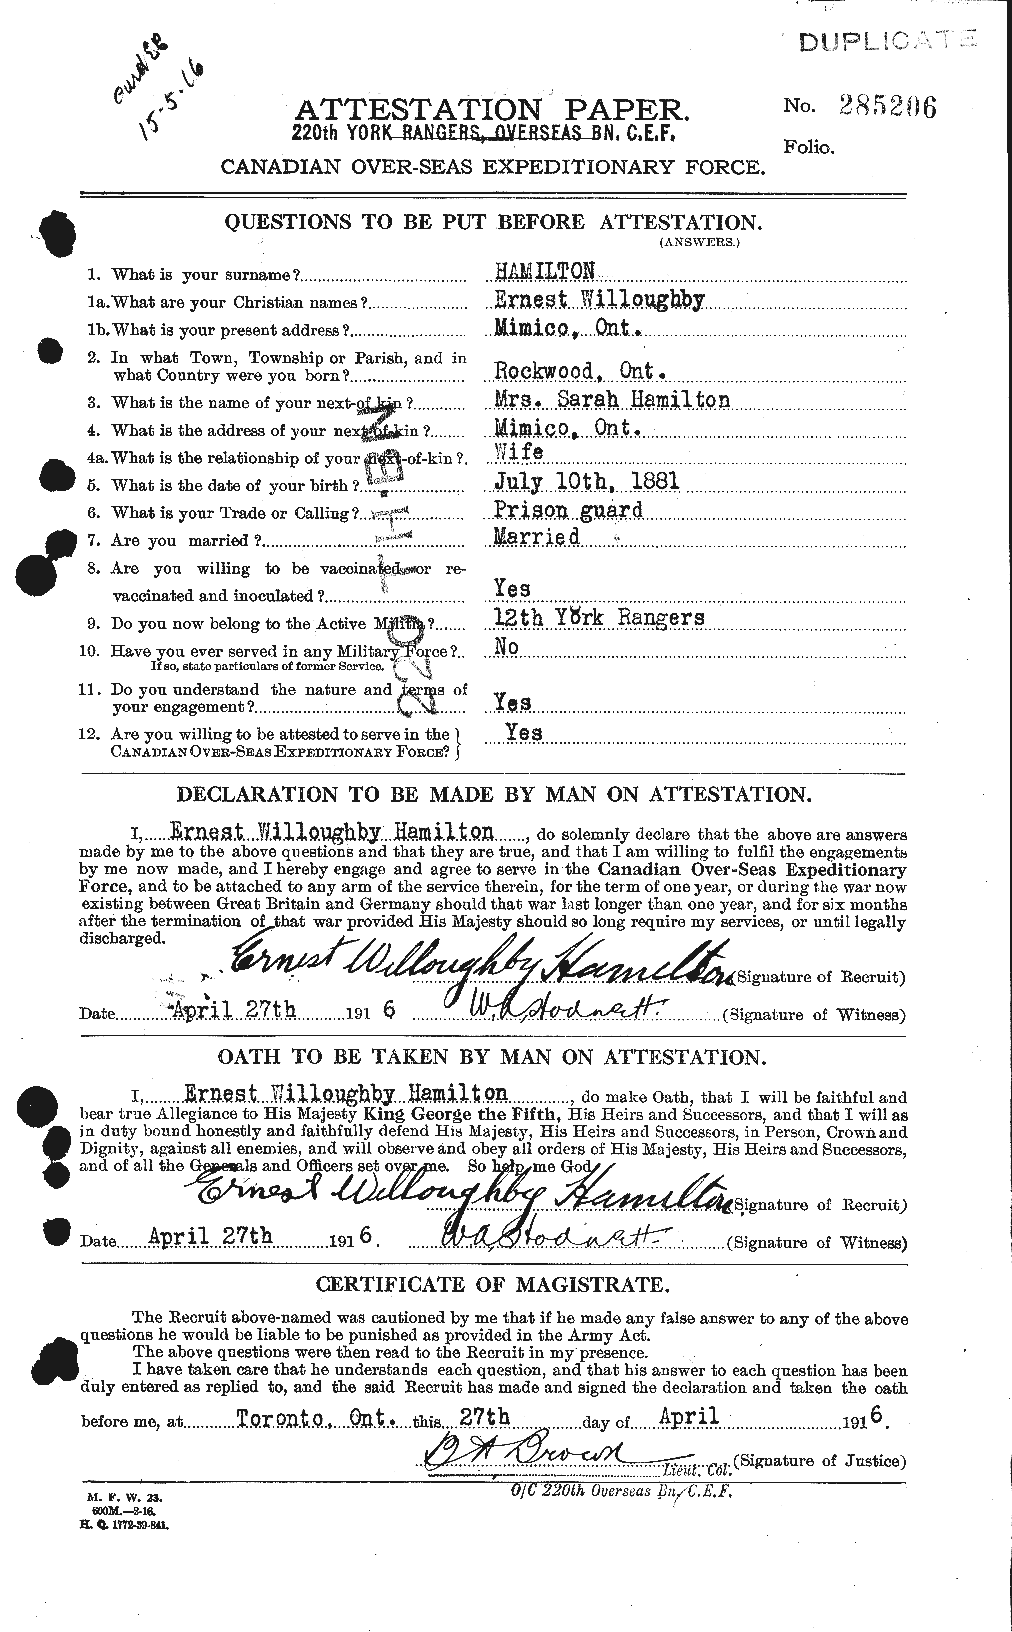 Personnel Records of the First World War - CEF 375391a